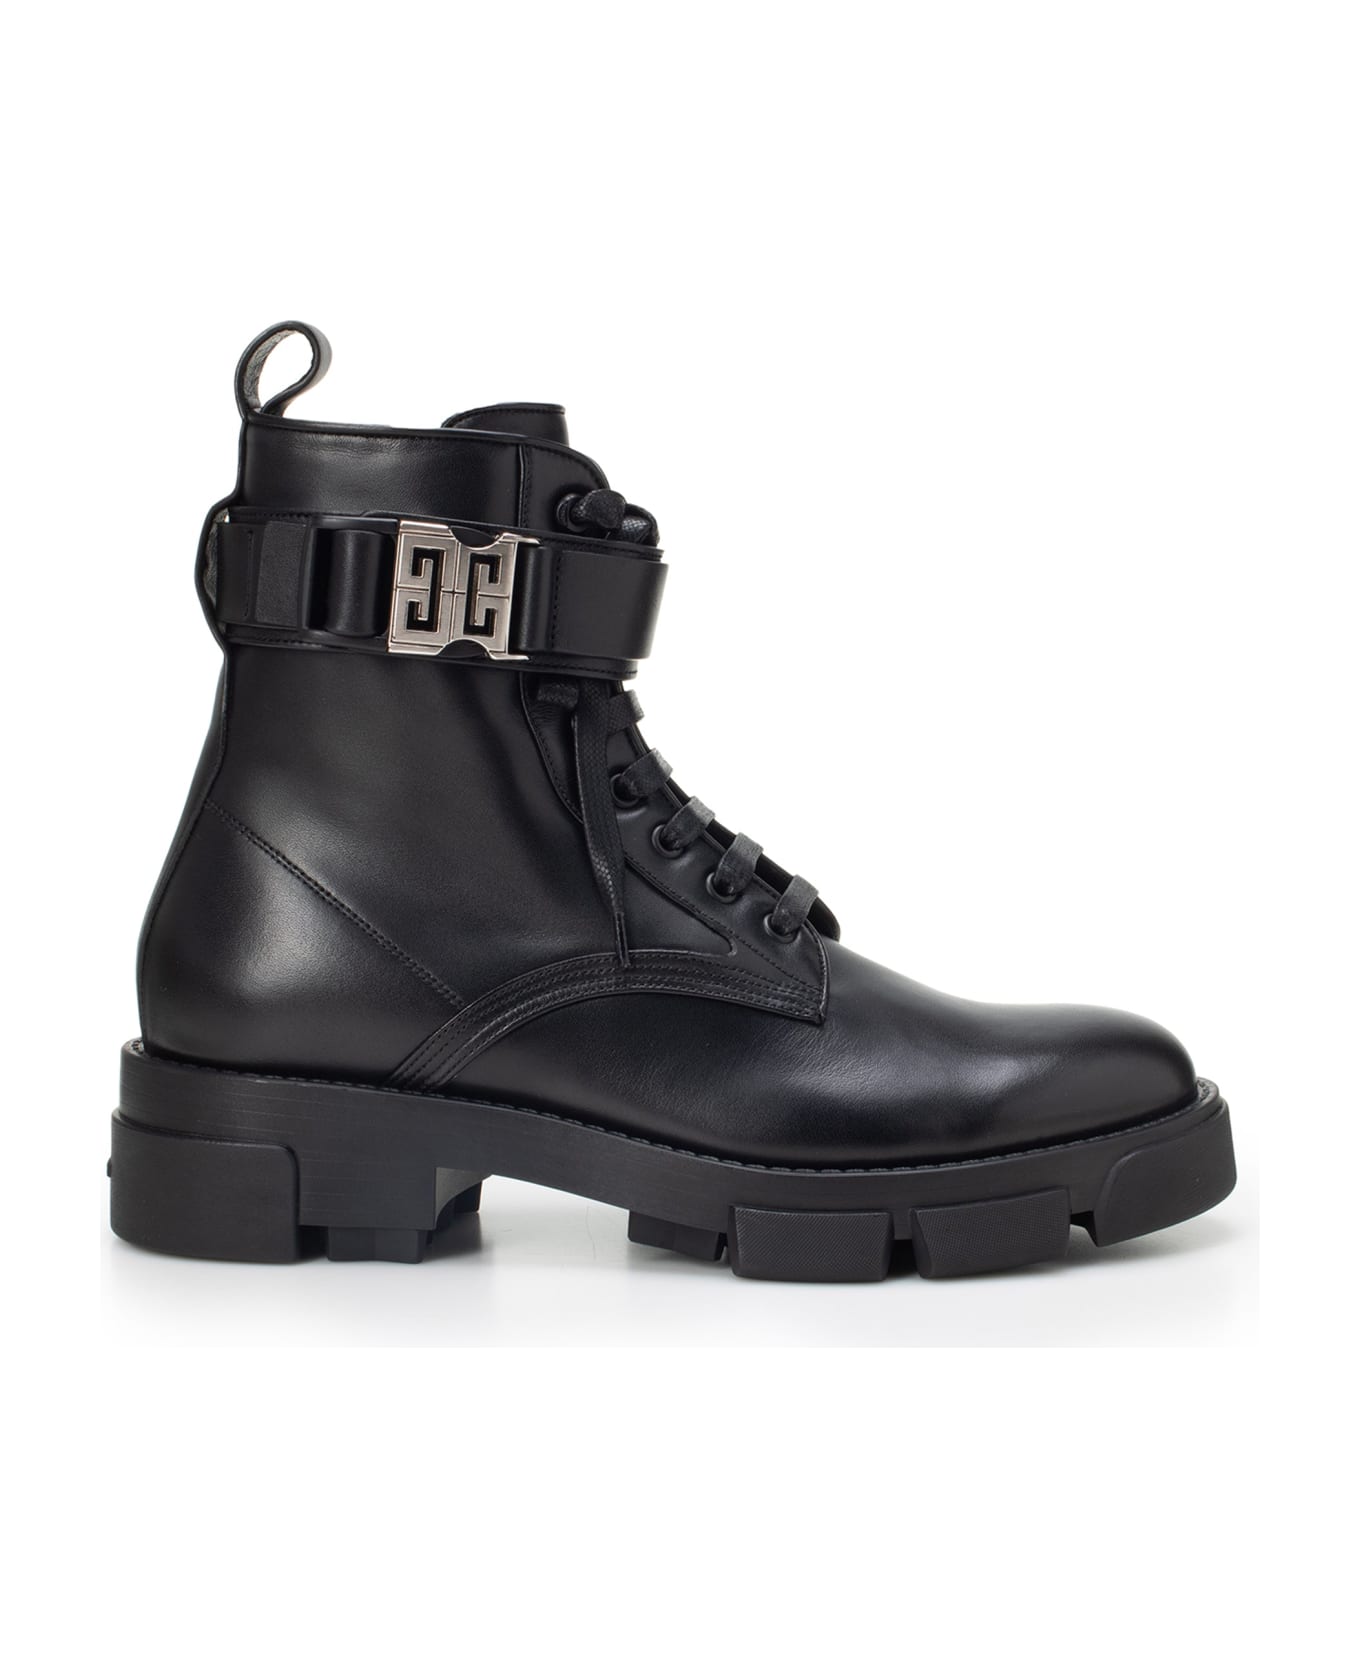 Givenchy Leather Combat Boots - Black